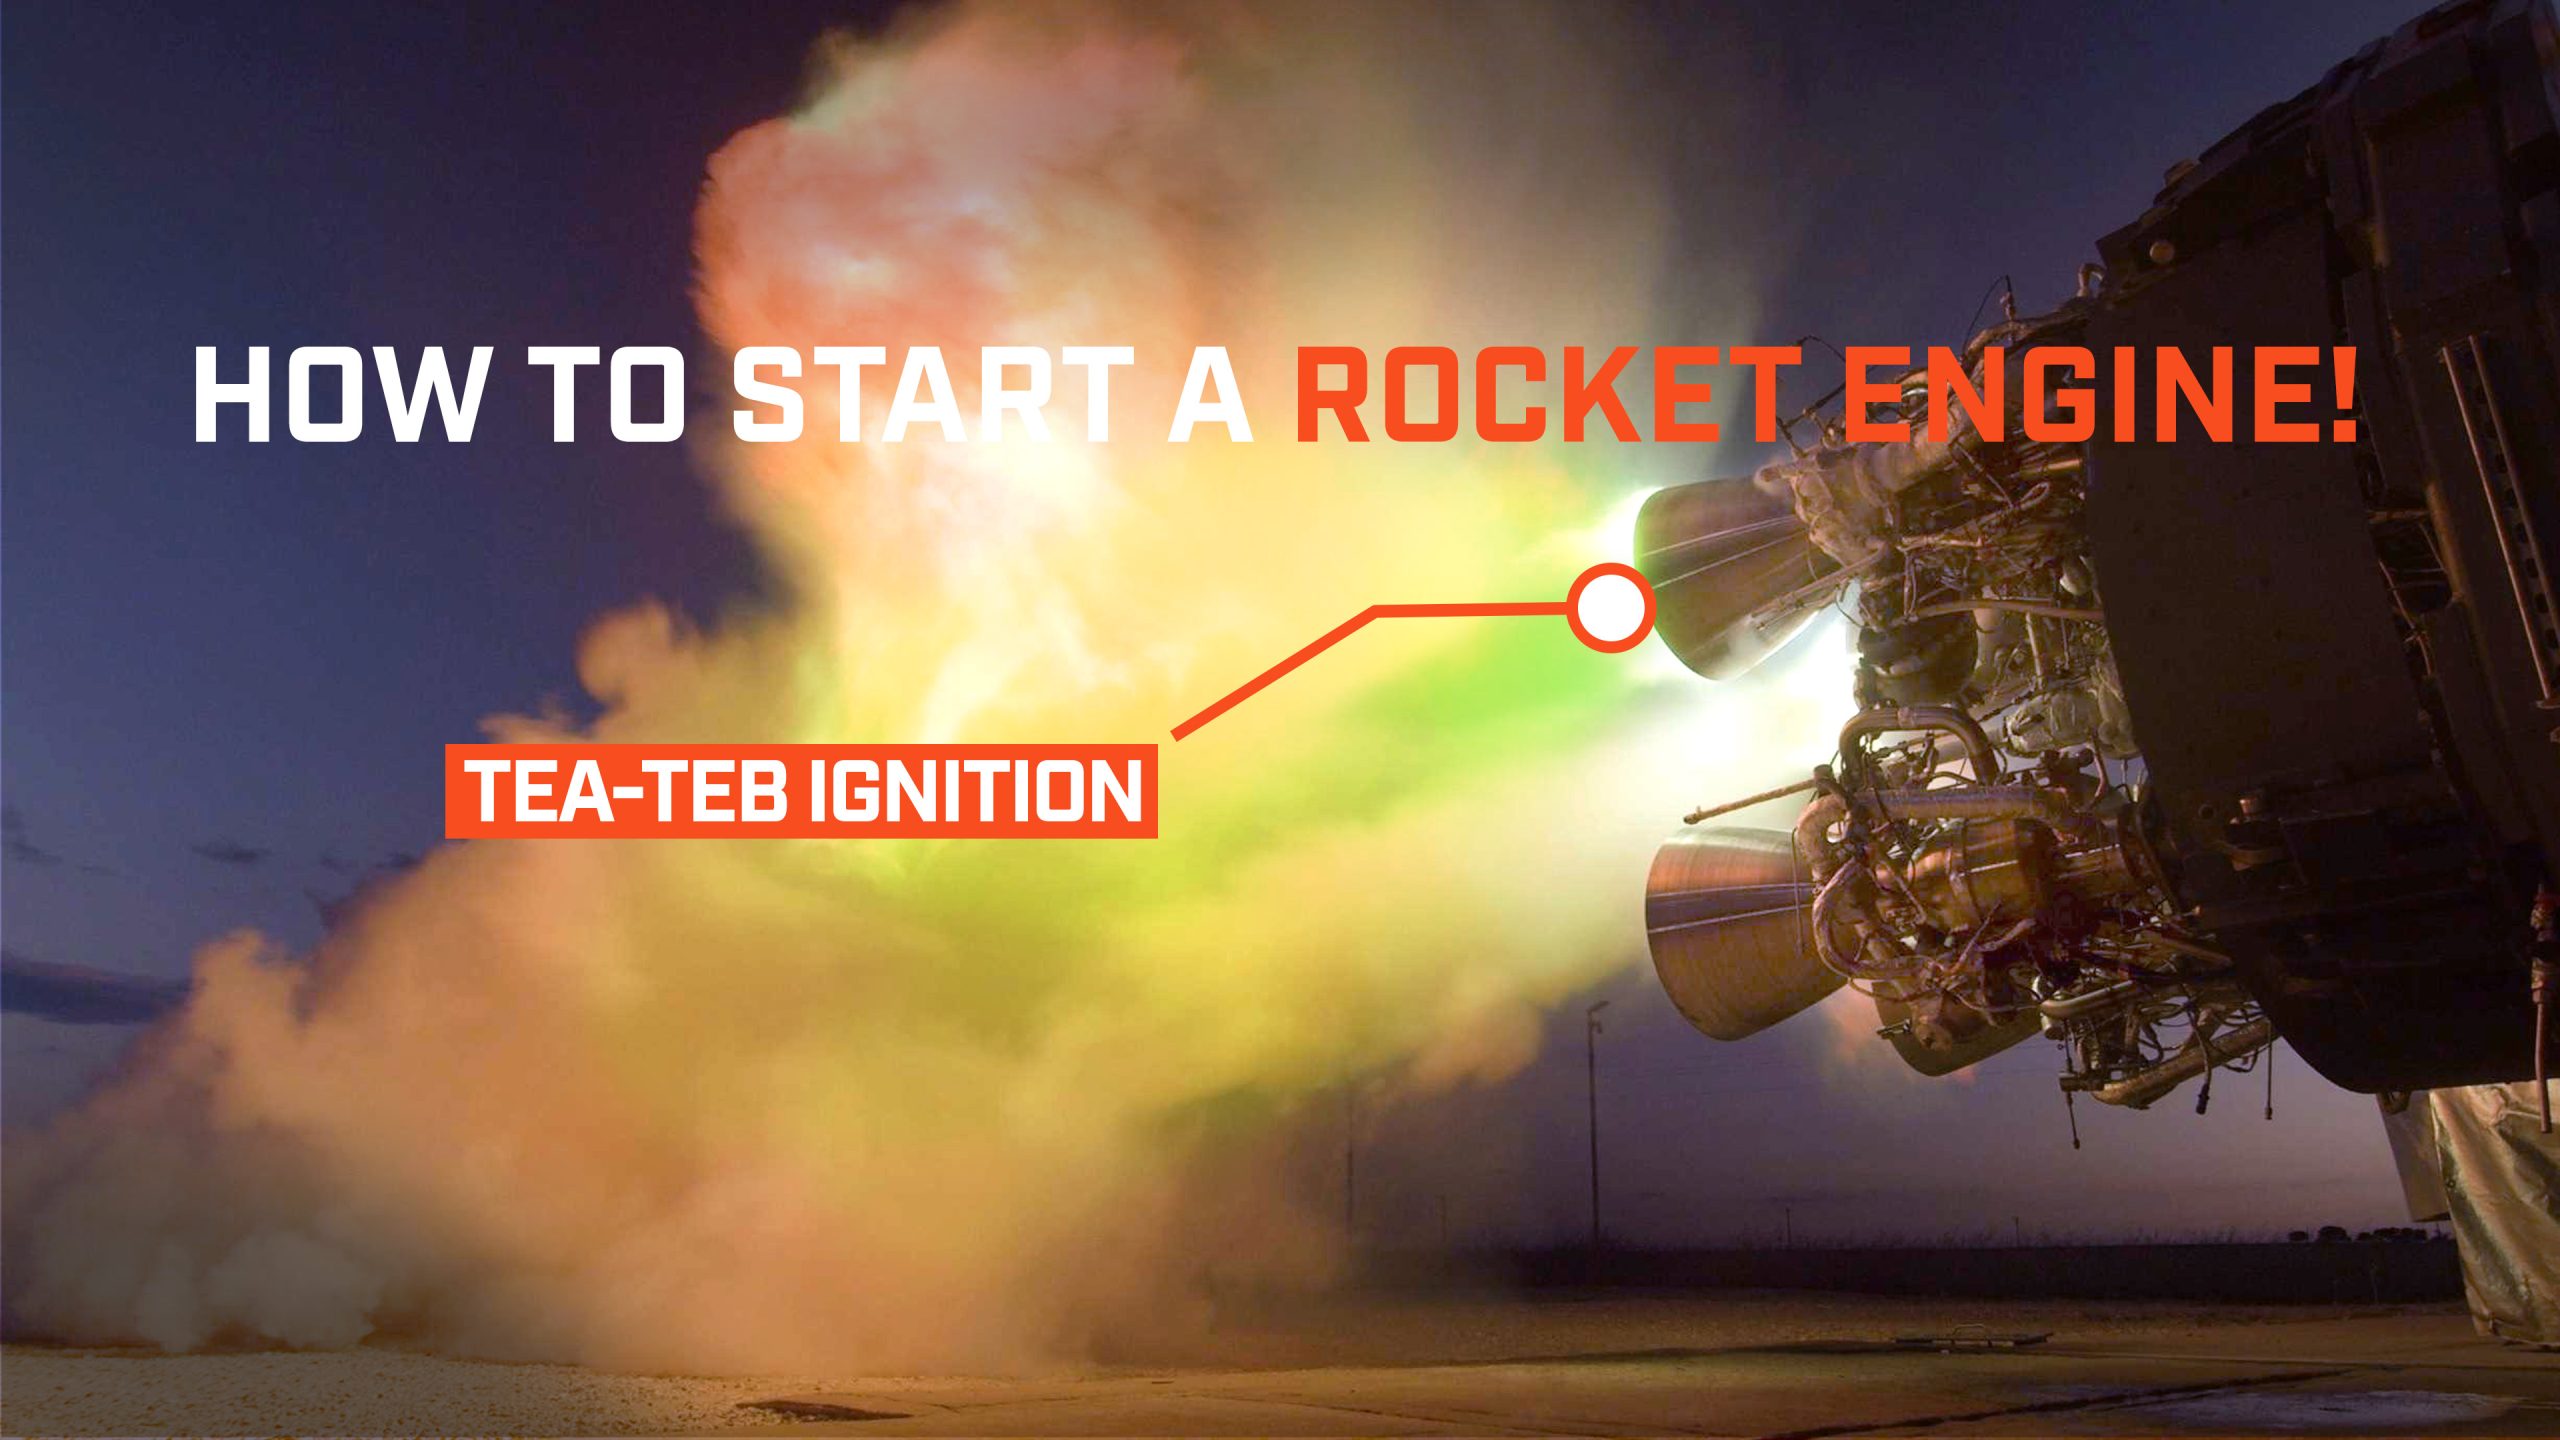 How to start a rocket engine